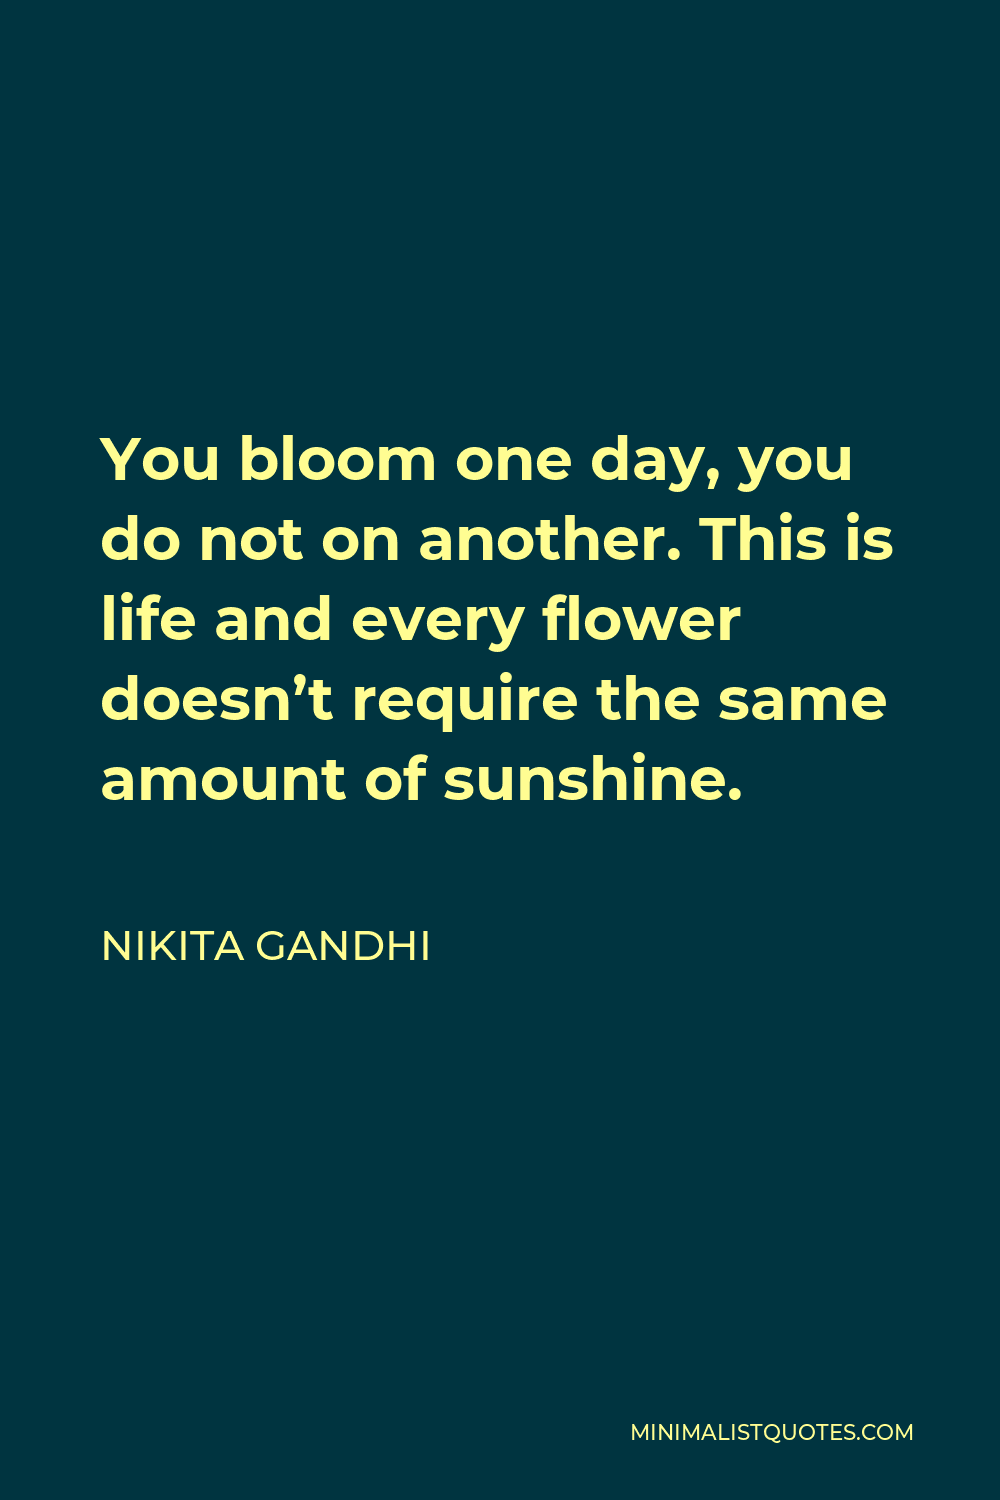 Nikita Gandhi Quote - You bloom one day, you do not on another. This is life and every flower doesn’t require the same amount of sunshine.